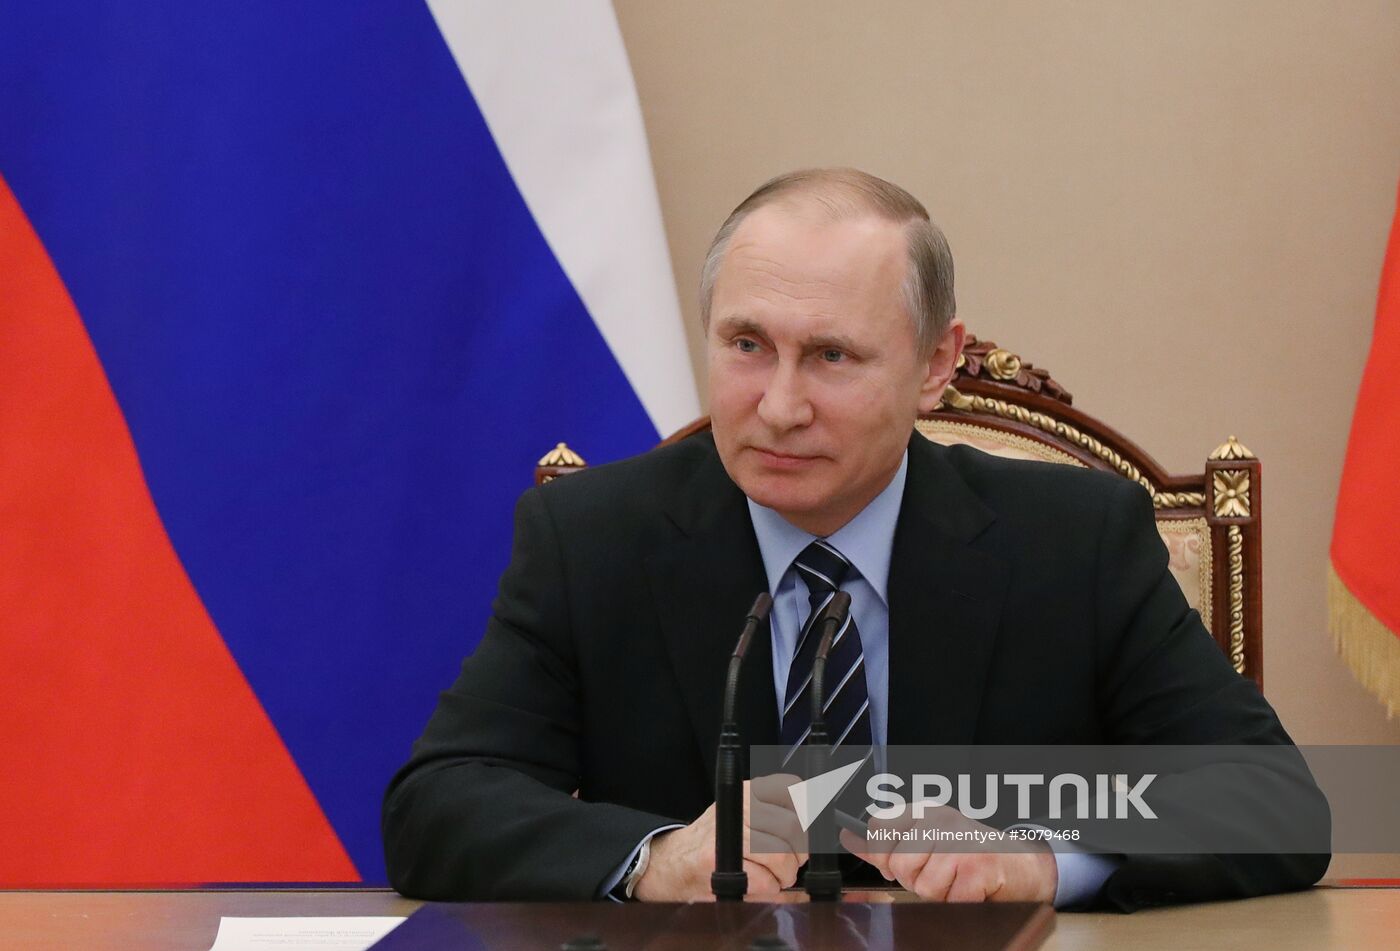 President Putin holds meeting with Russian Security Council